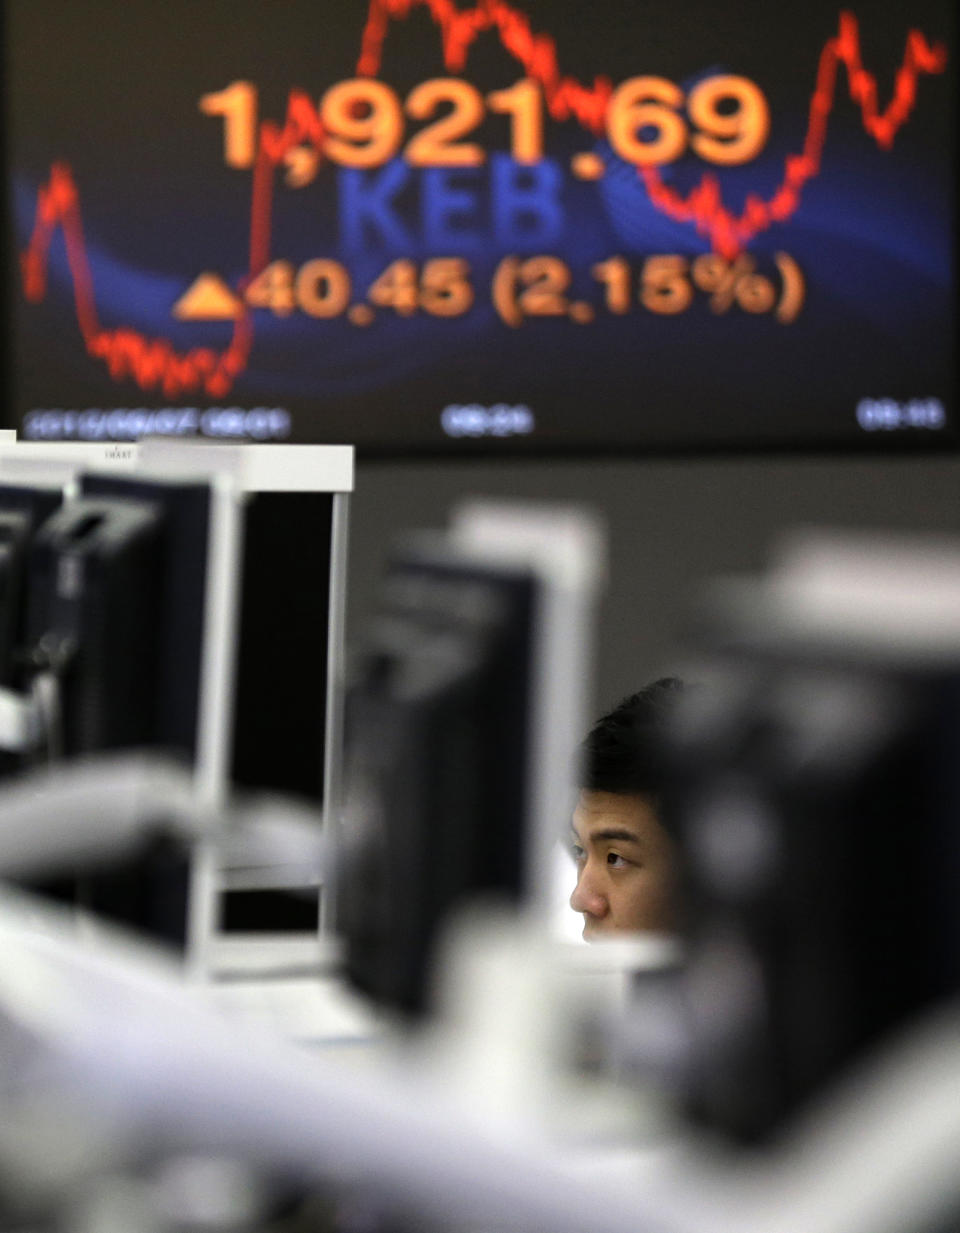 A currency trader looks at the monitors near a screen showing the Korea Composite Stock Price Index (KOSPI) at the foreign exchange dealing room of the Korea Exchange Bank headquarters in Seoul, South Korea, Friday, Sept. 7, 2012. Asian stock markets rallied Friday, boosted by strong advances on Wall Street and a highly anticipated plan to assist debt-riddled countries in the eurozone. (AP Photo/Lee Jin-man)